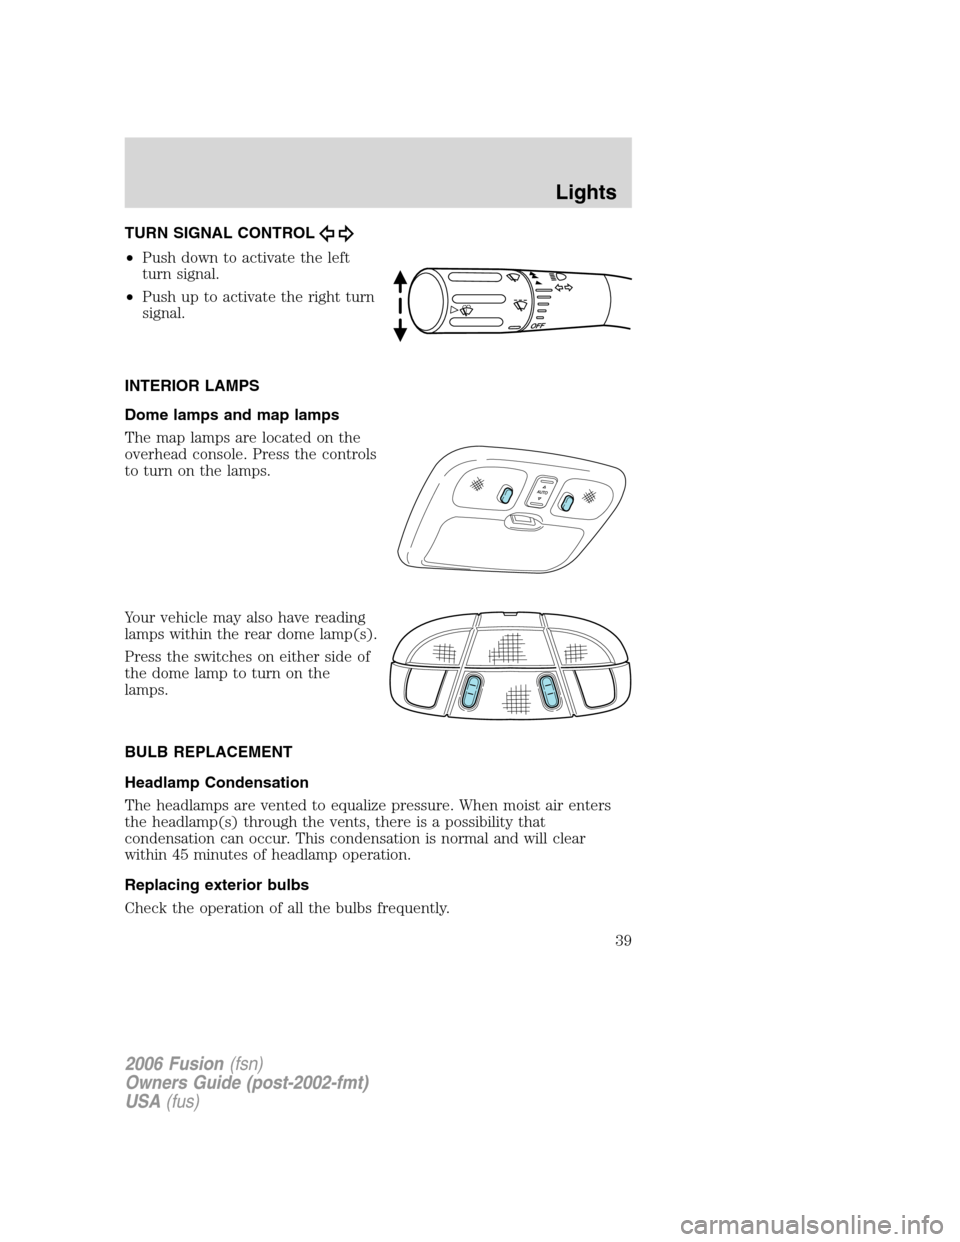 FORD FUSION (AMERICAS) 2006 1.G Owners Guide TURN SIGNAL CONTROL
•Push down to activate the left
turn signal.
•Push up to activate the right turn
signal.
INTERIOR LAMPS
Dome lamps and map lamps
The map lamps are located on the
overhead conso